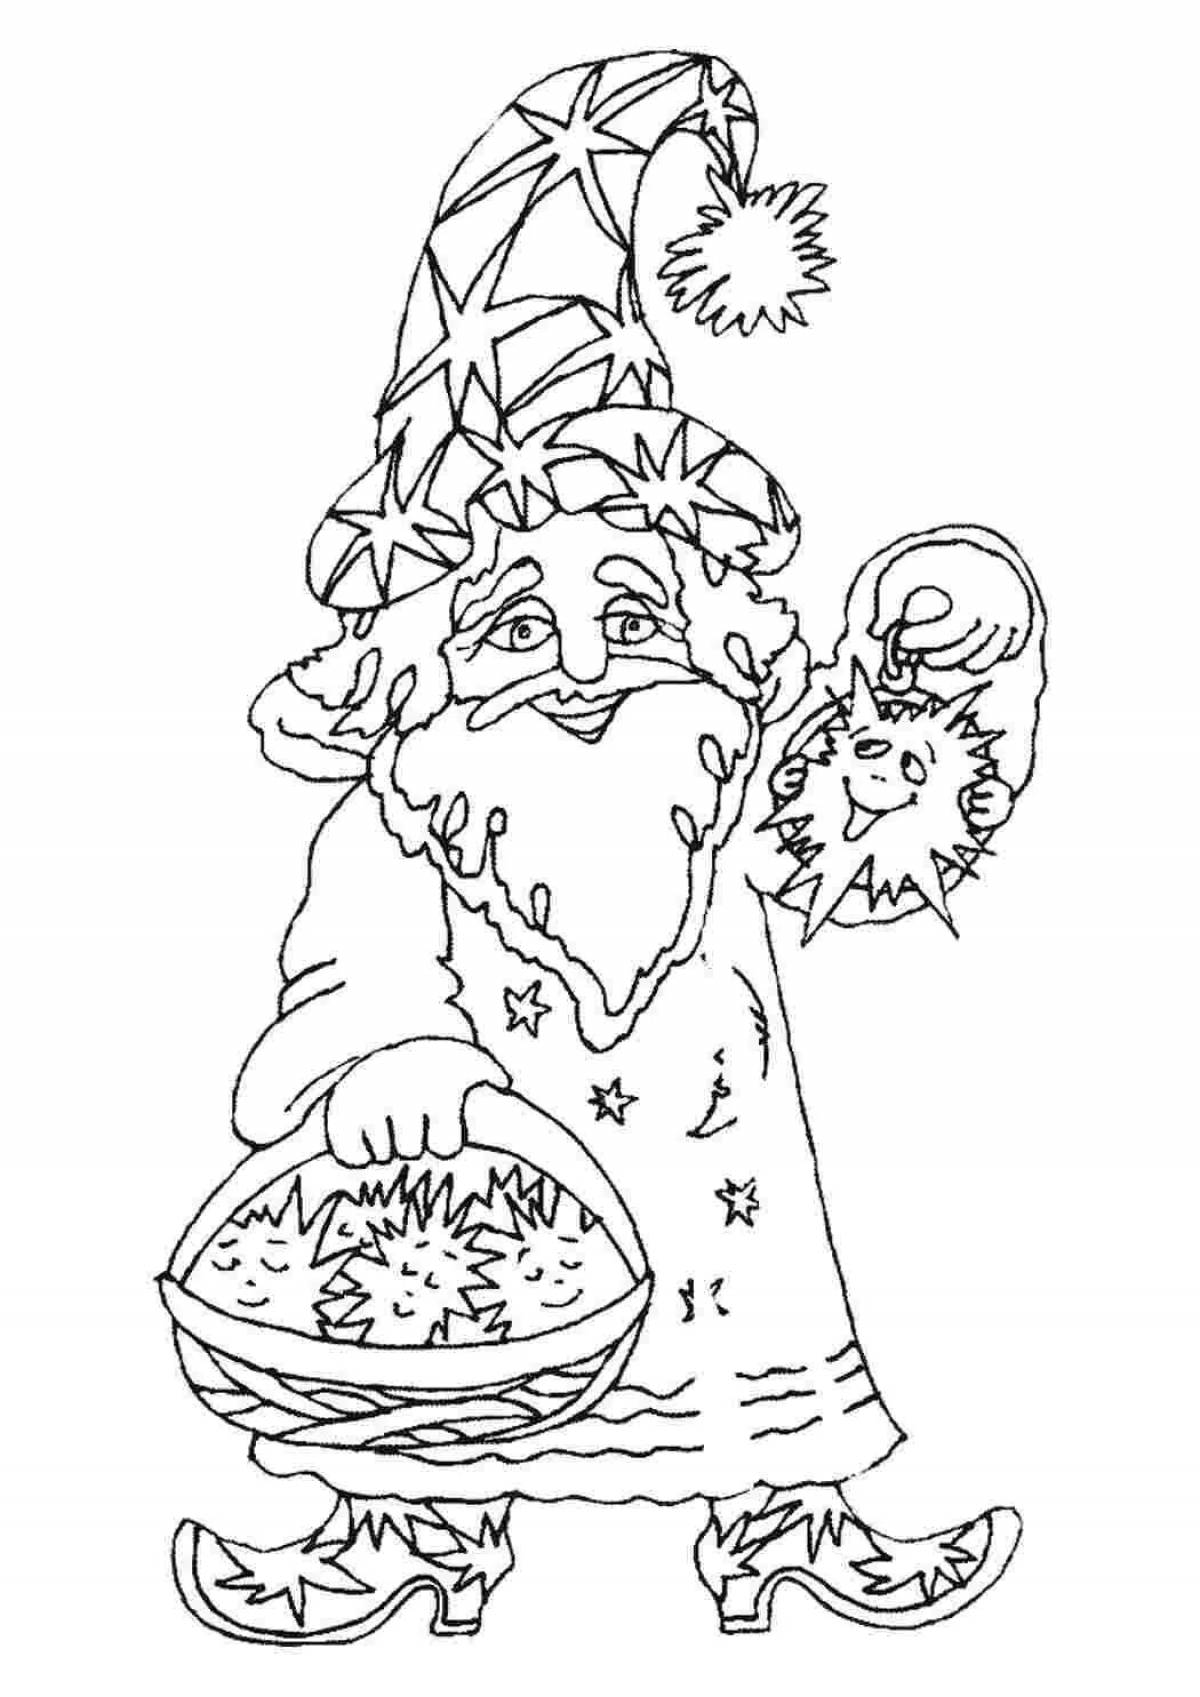 Rich sorcerer coloring page